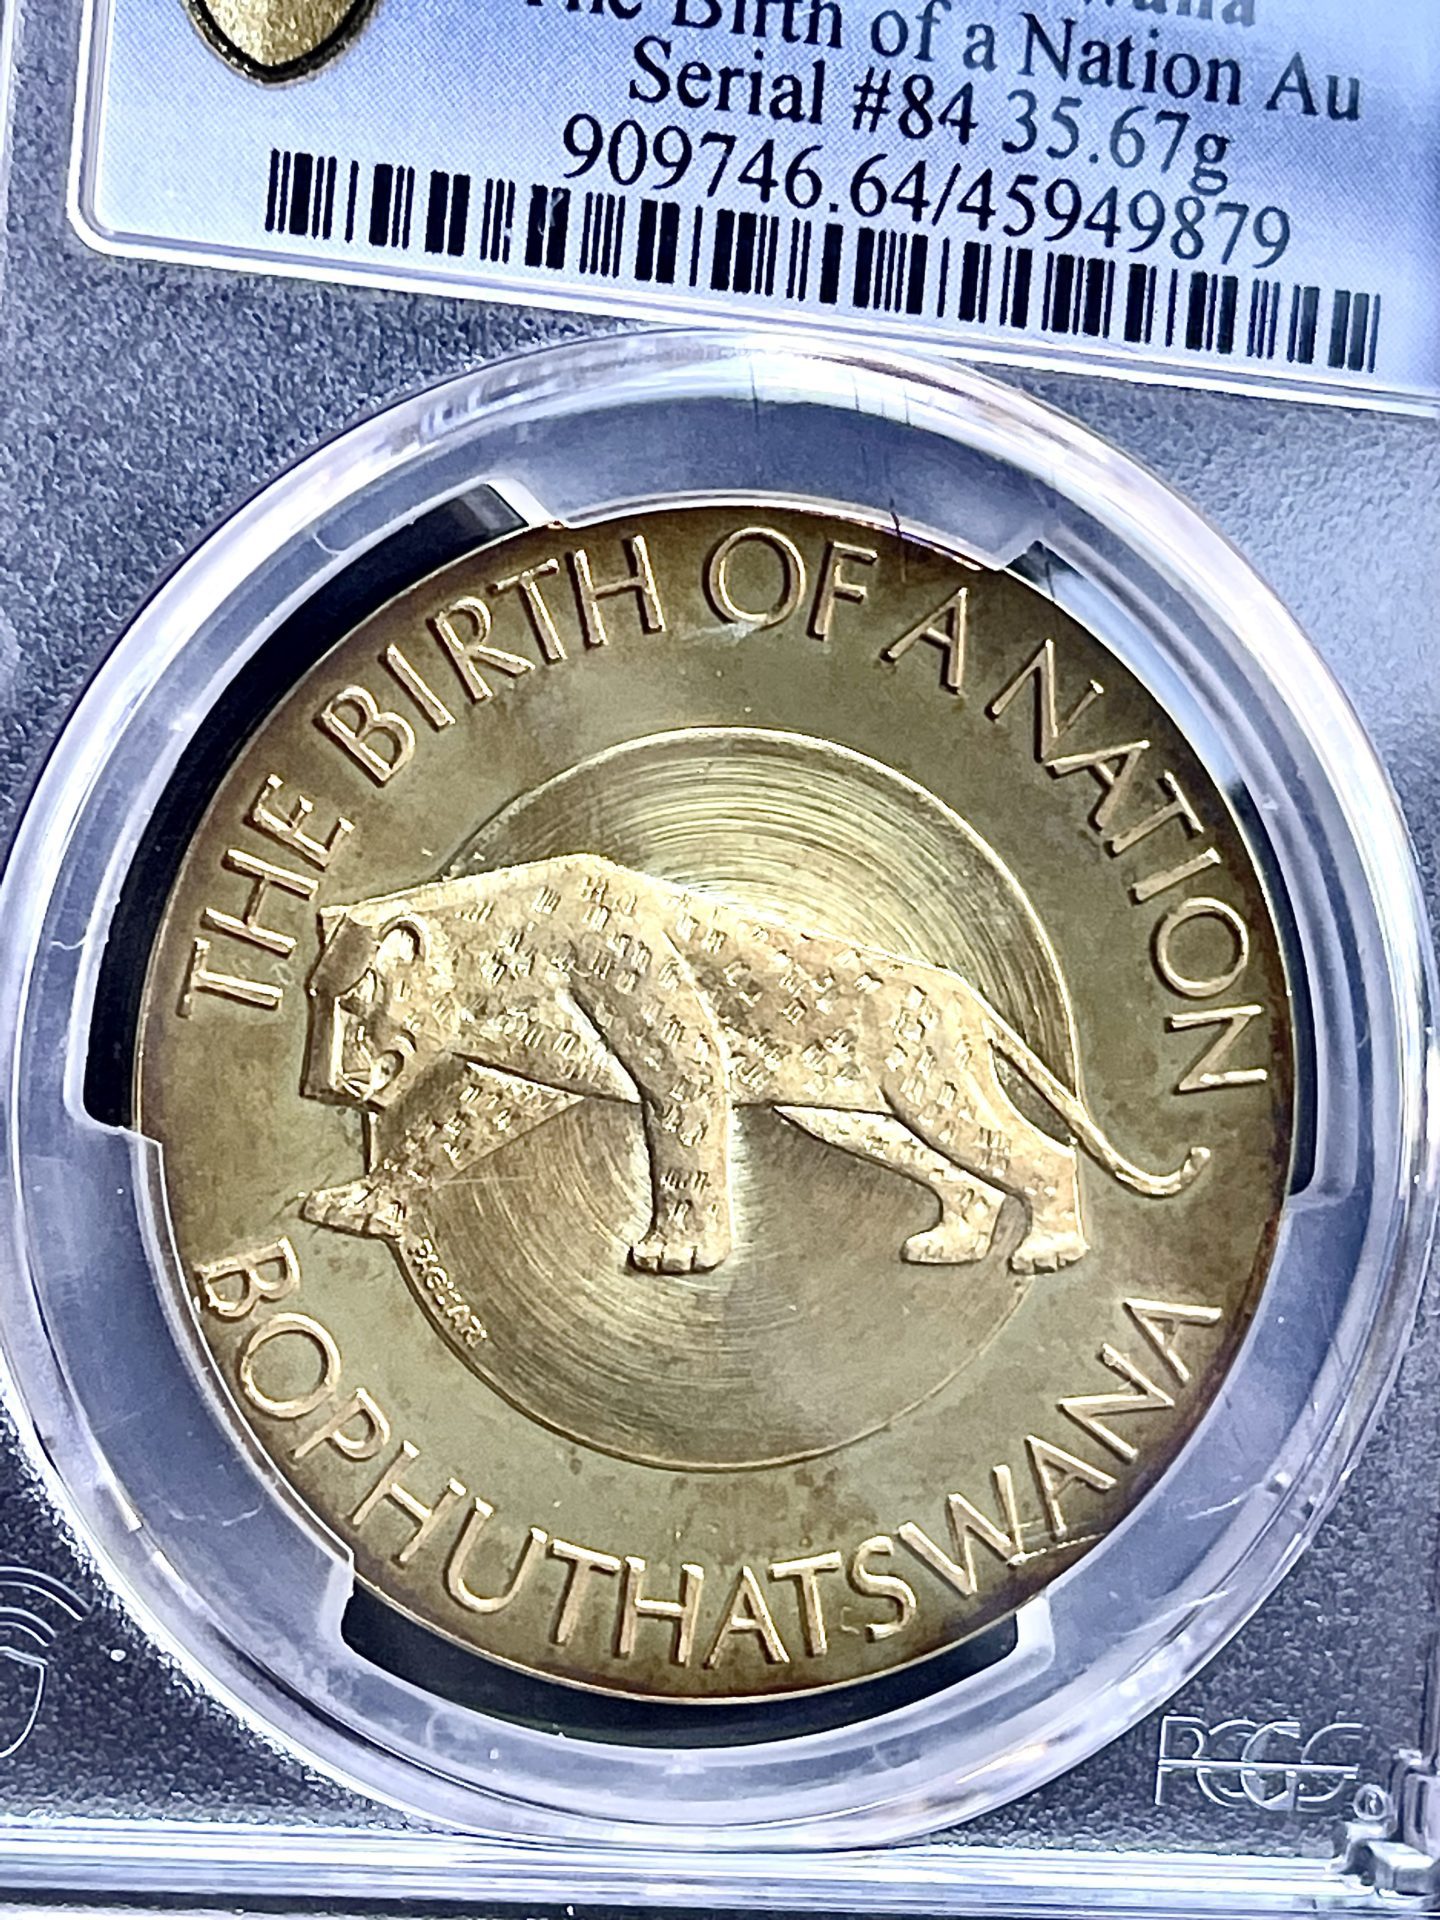 Bophuthatswana - 1977 - The Birth of a Nation - Gold Medaille - PCGS SP64